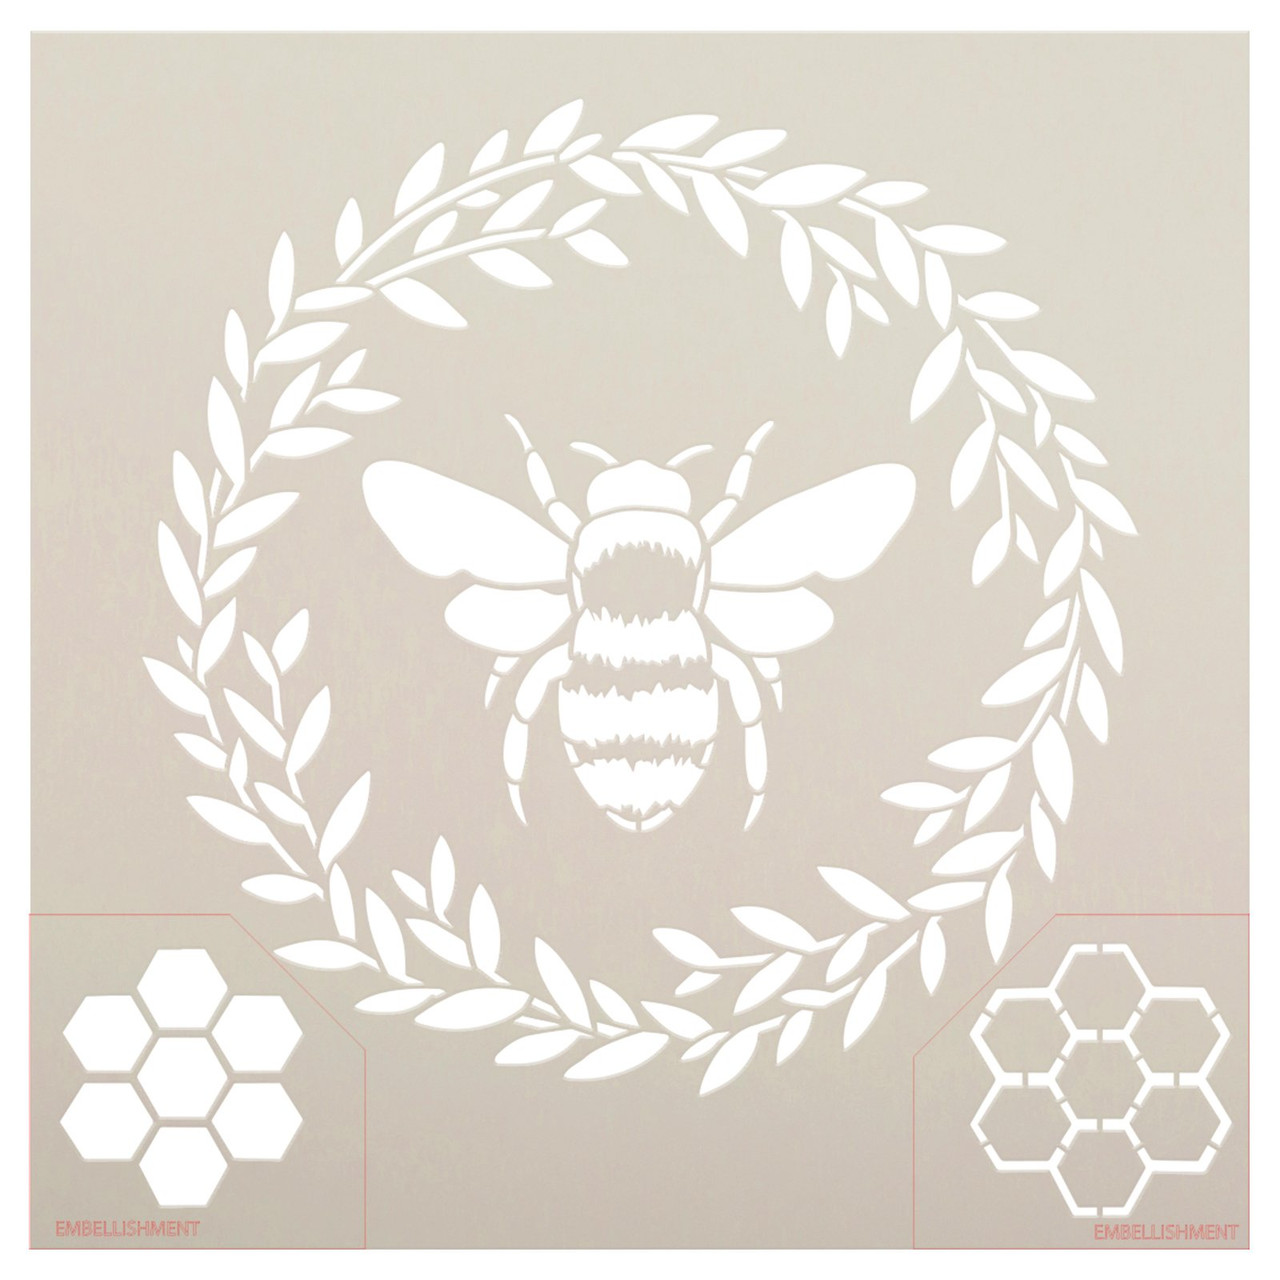 Bee with Wreath Stencil by StudioR12 | Craft DIY Spring Home Decor | Paint Wood Sign | Reusable Mylar Template | Select Size